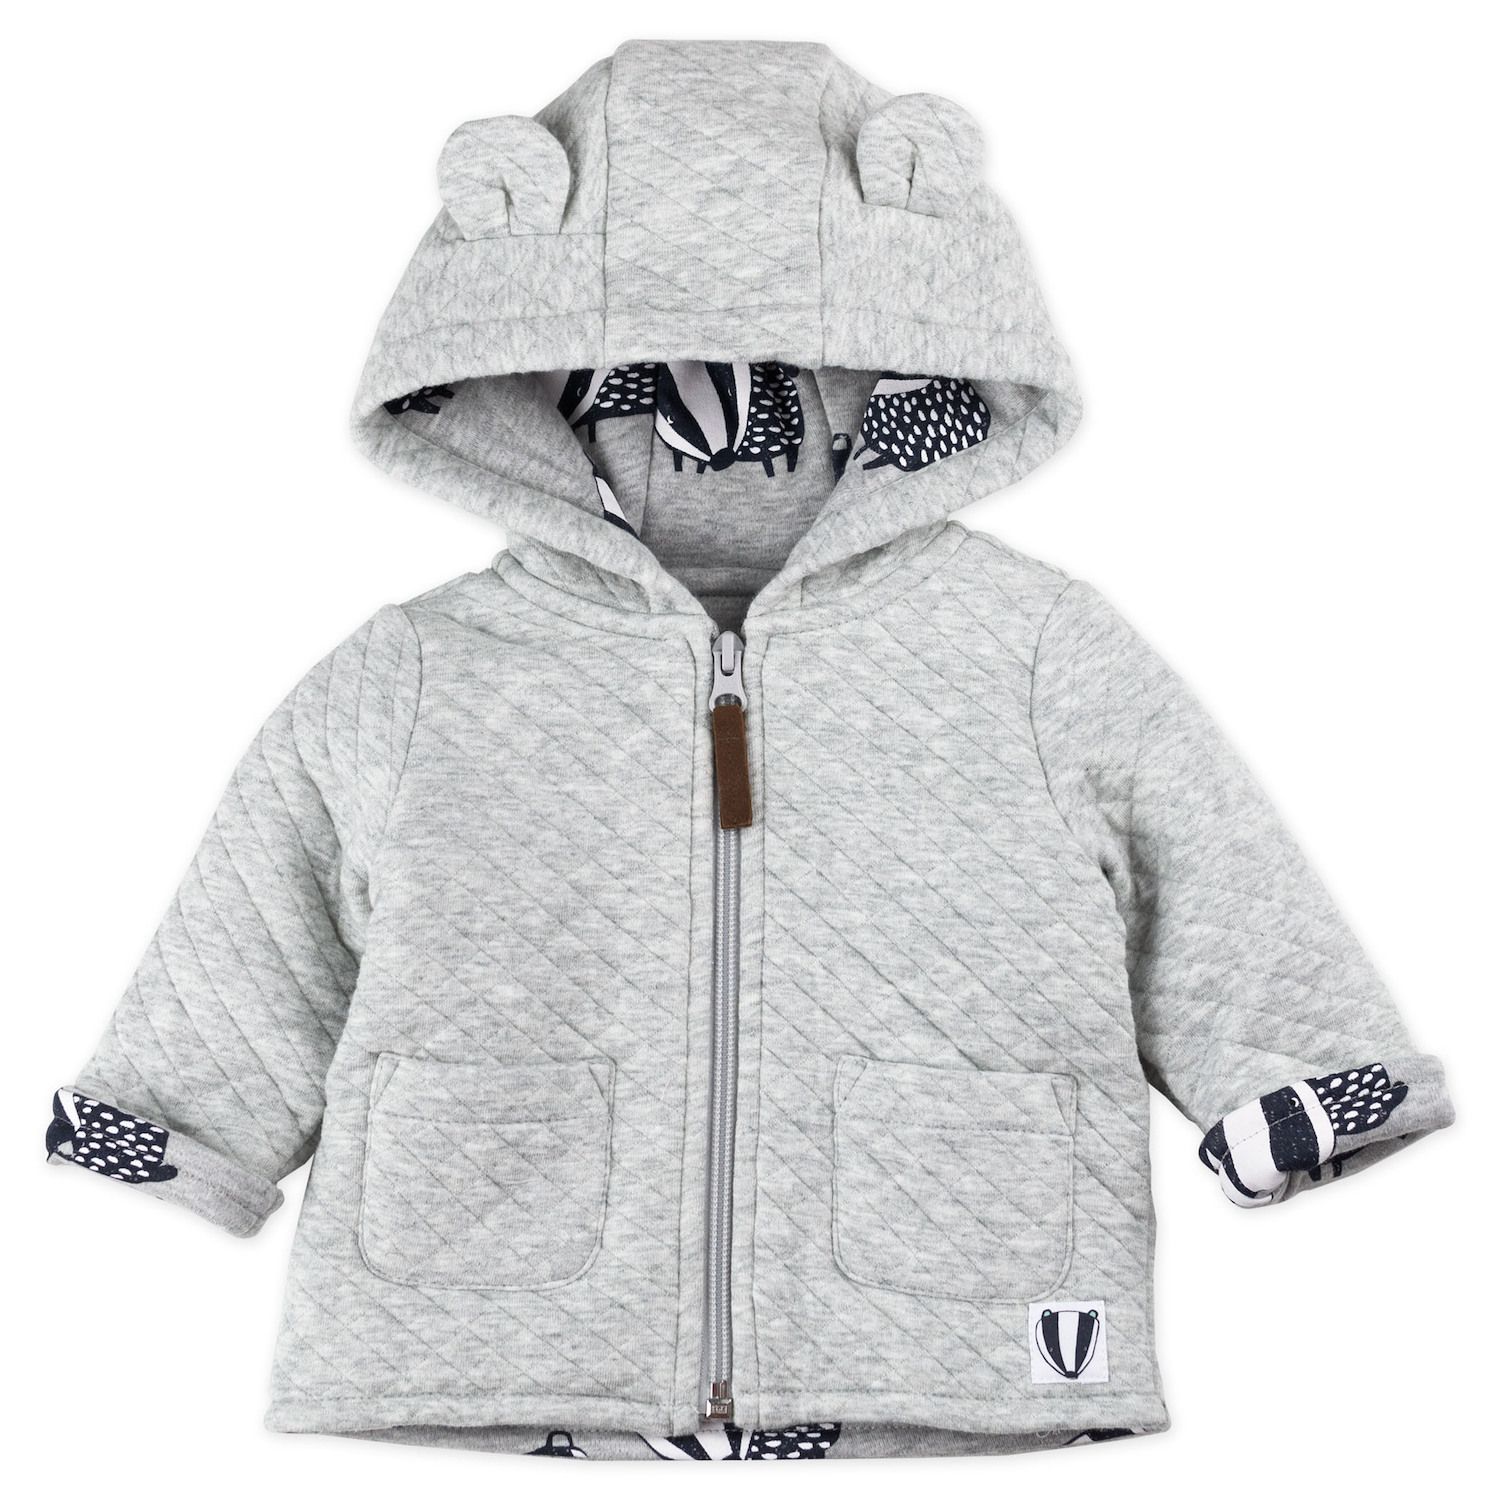 baby boy quilted jacket